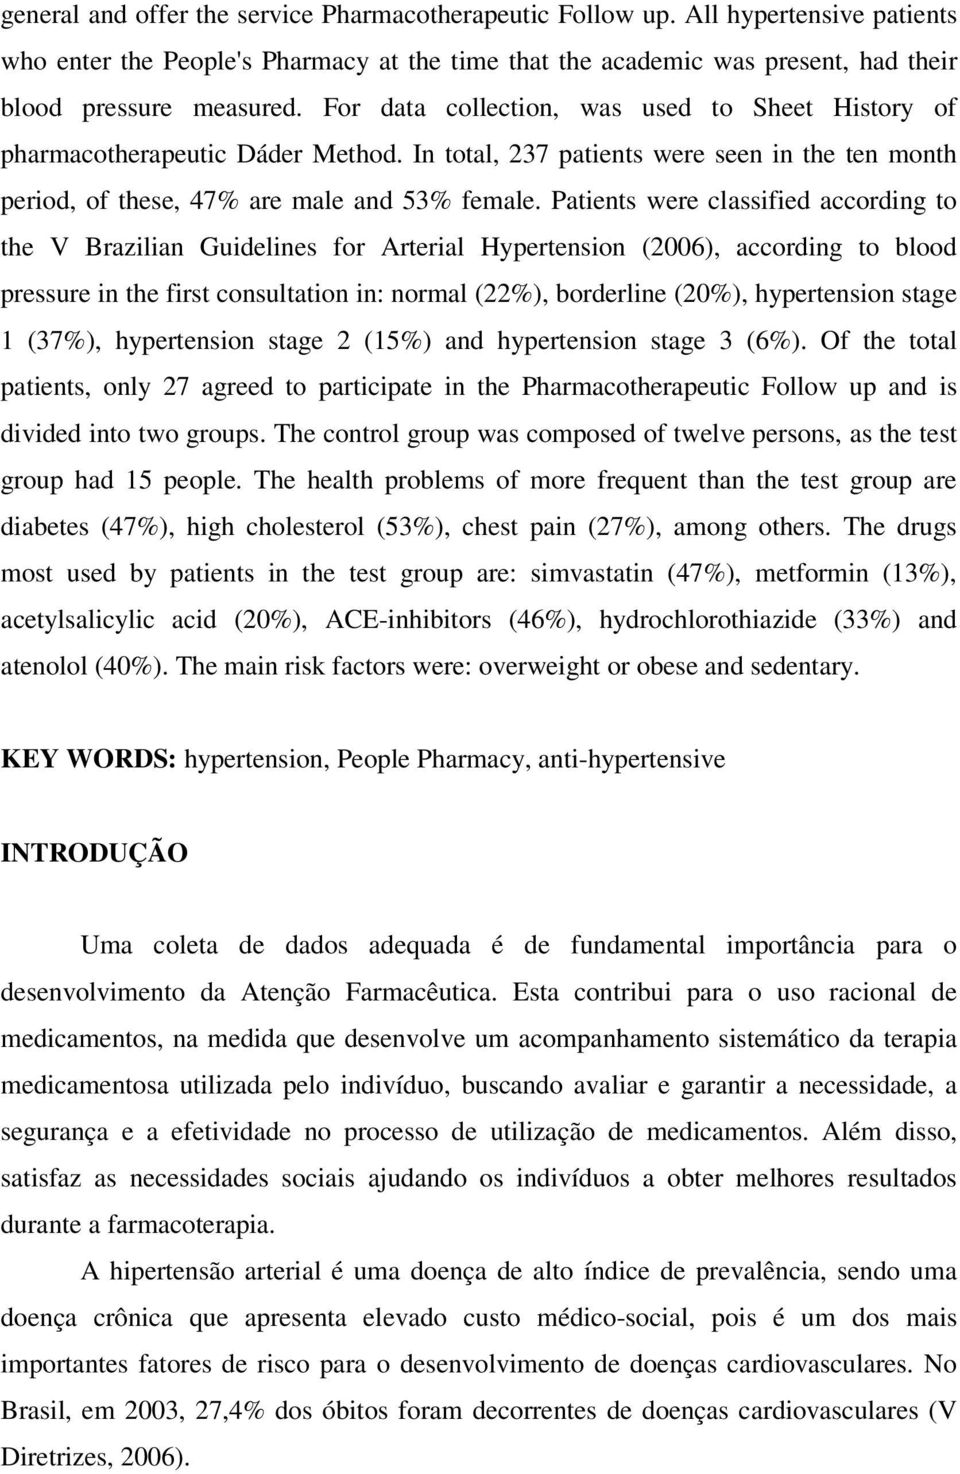 Patients were classified according to the V Brazilian Guidelines for Arterial Hypertension (2006), according to blood pressure in the first consultation in: normal (22%), borderline (20%),